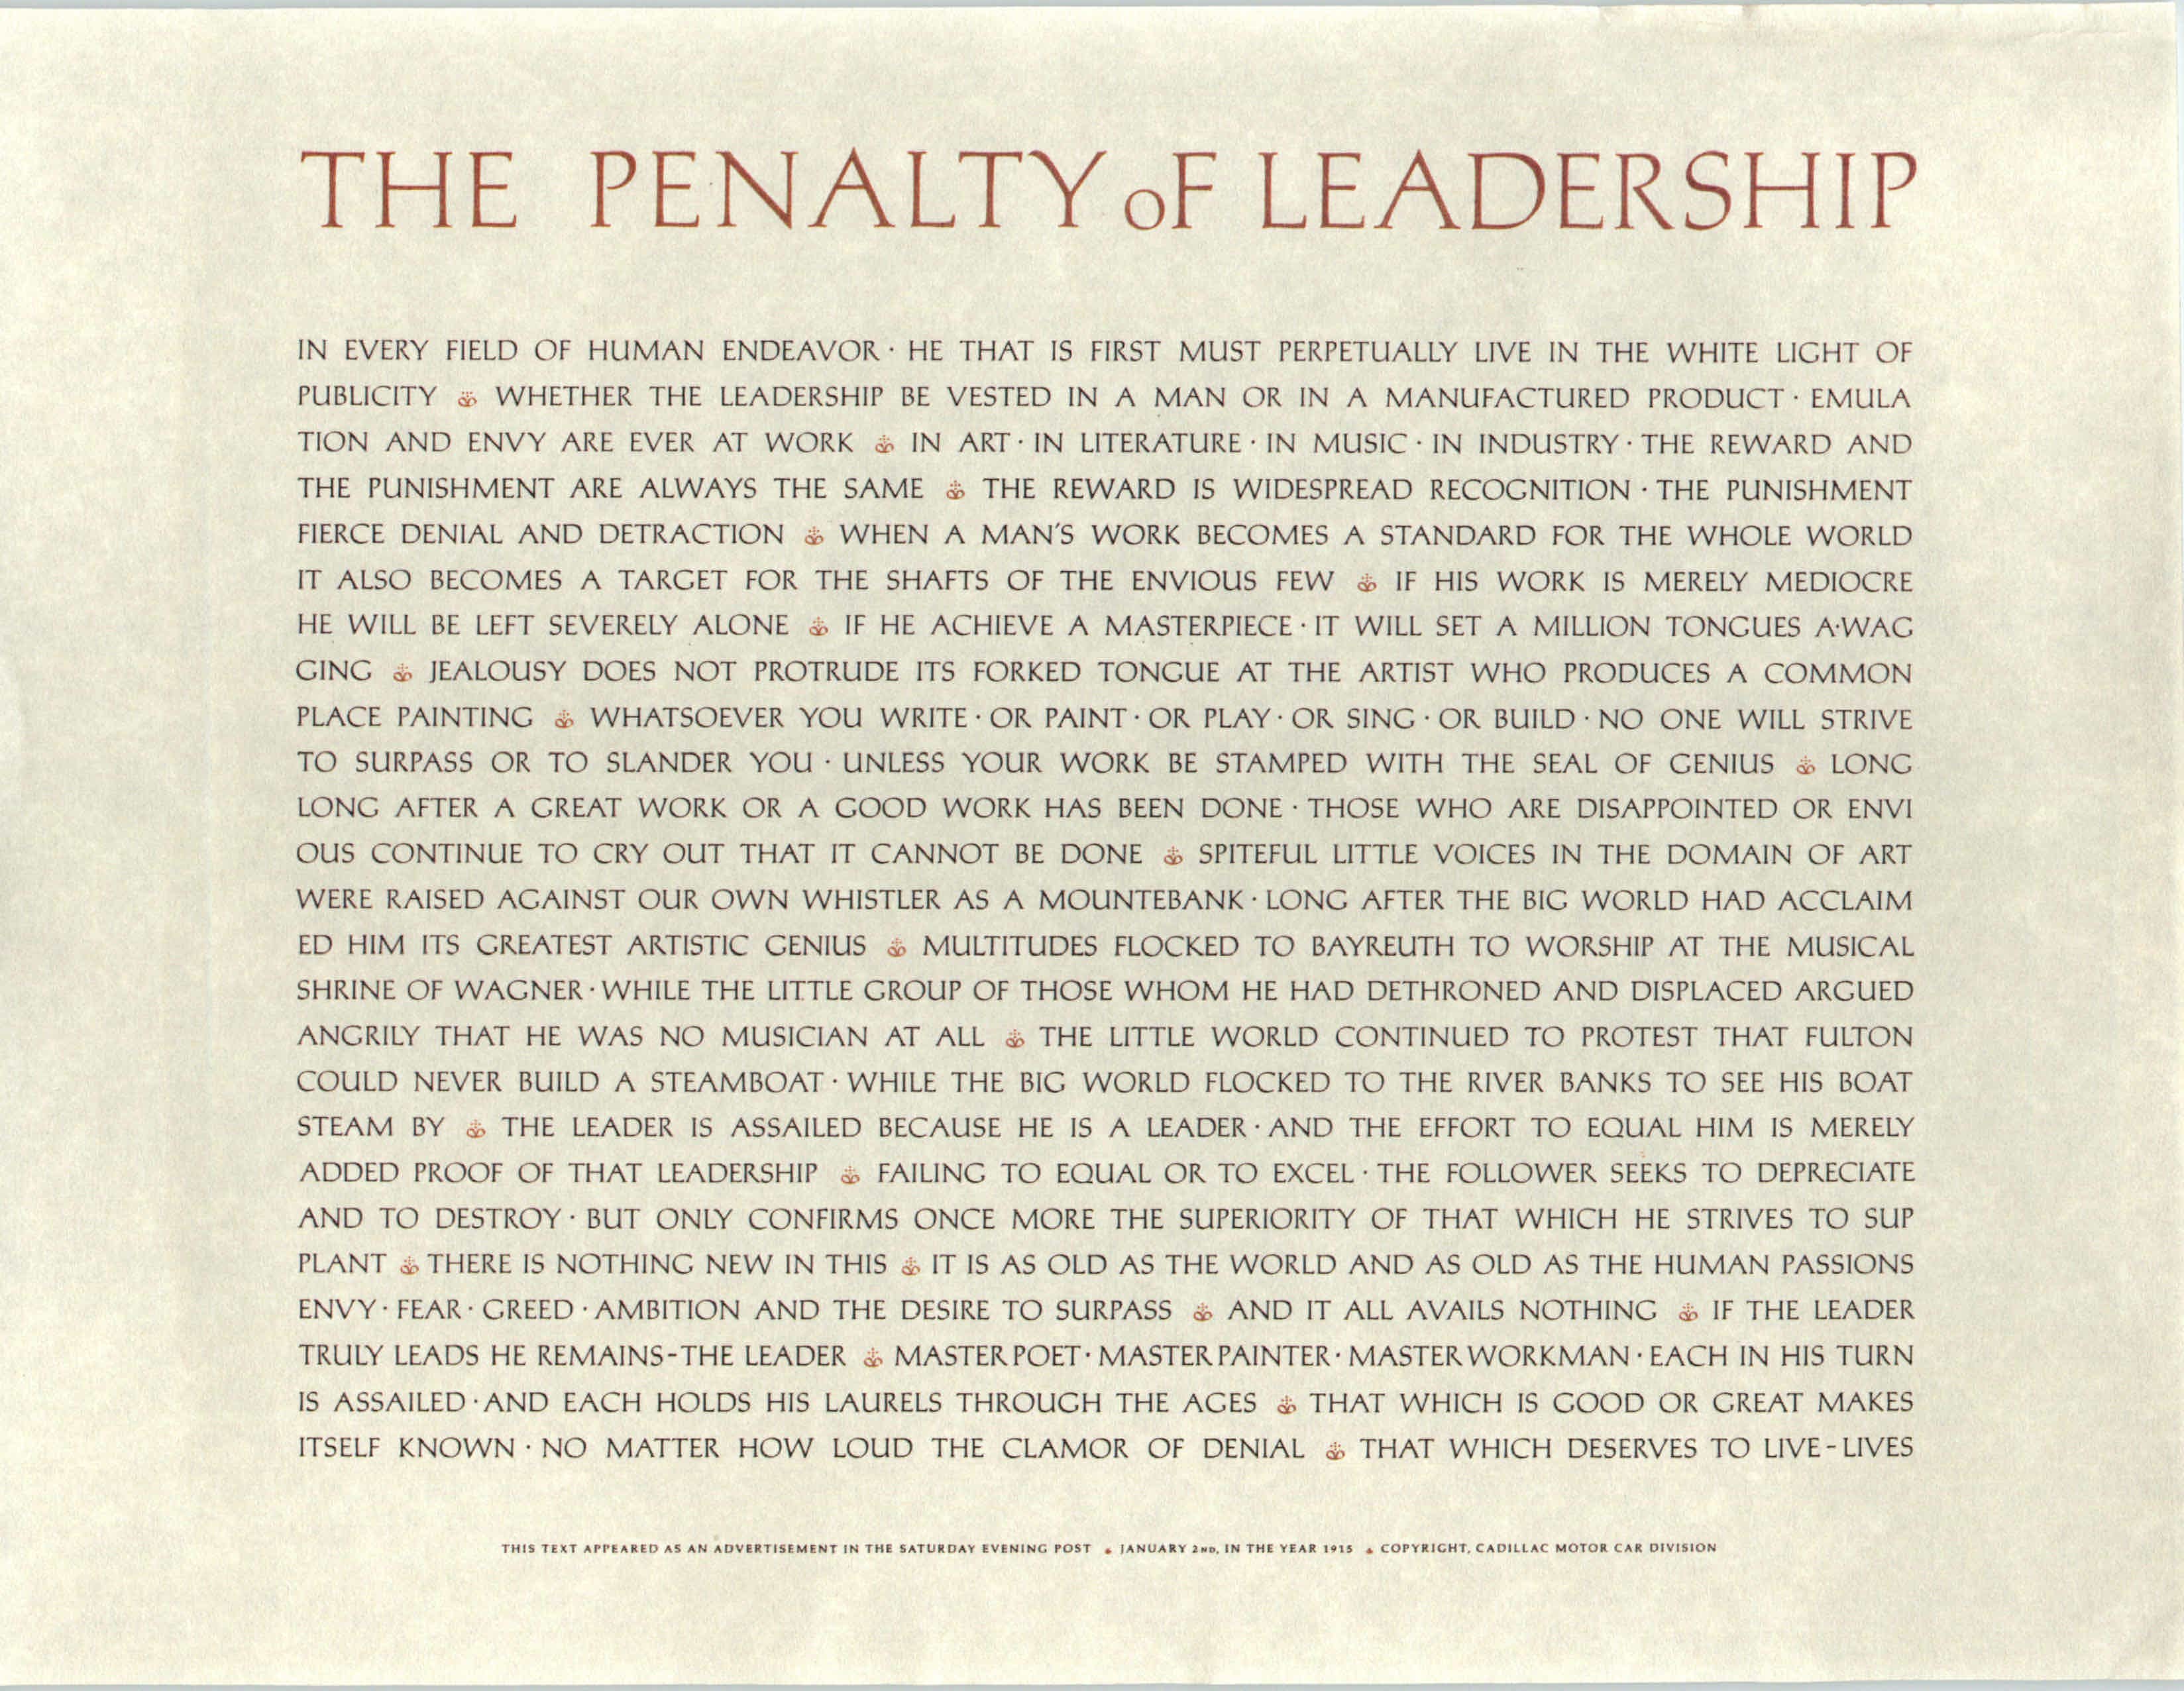 The Penalty of Leadership